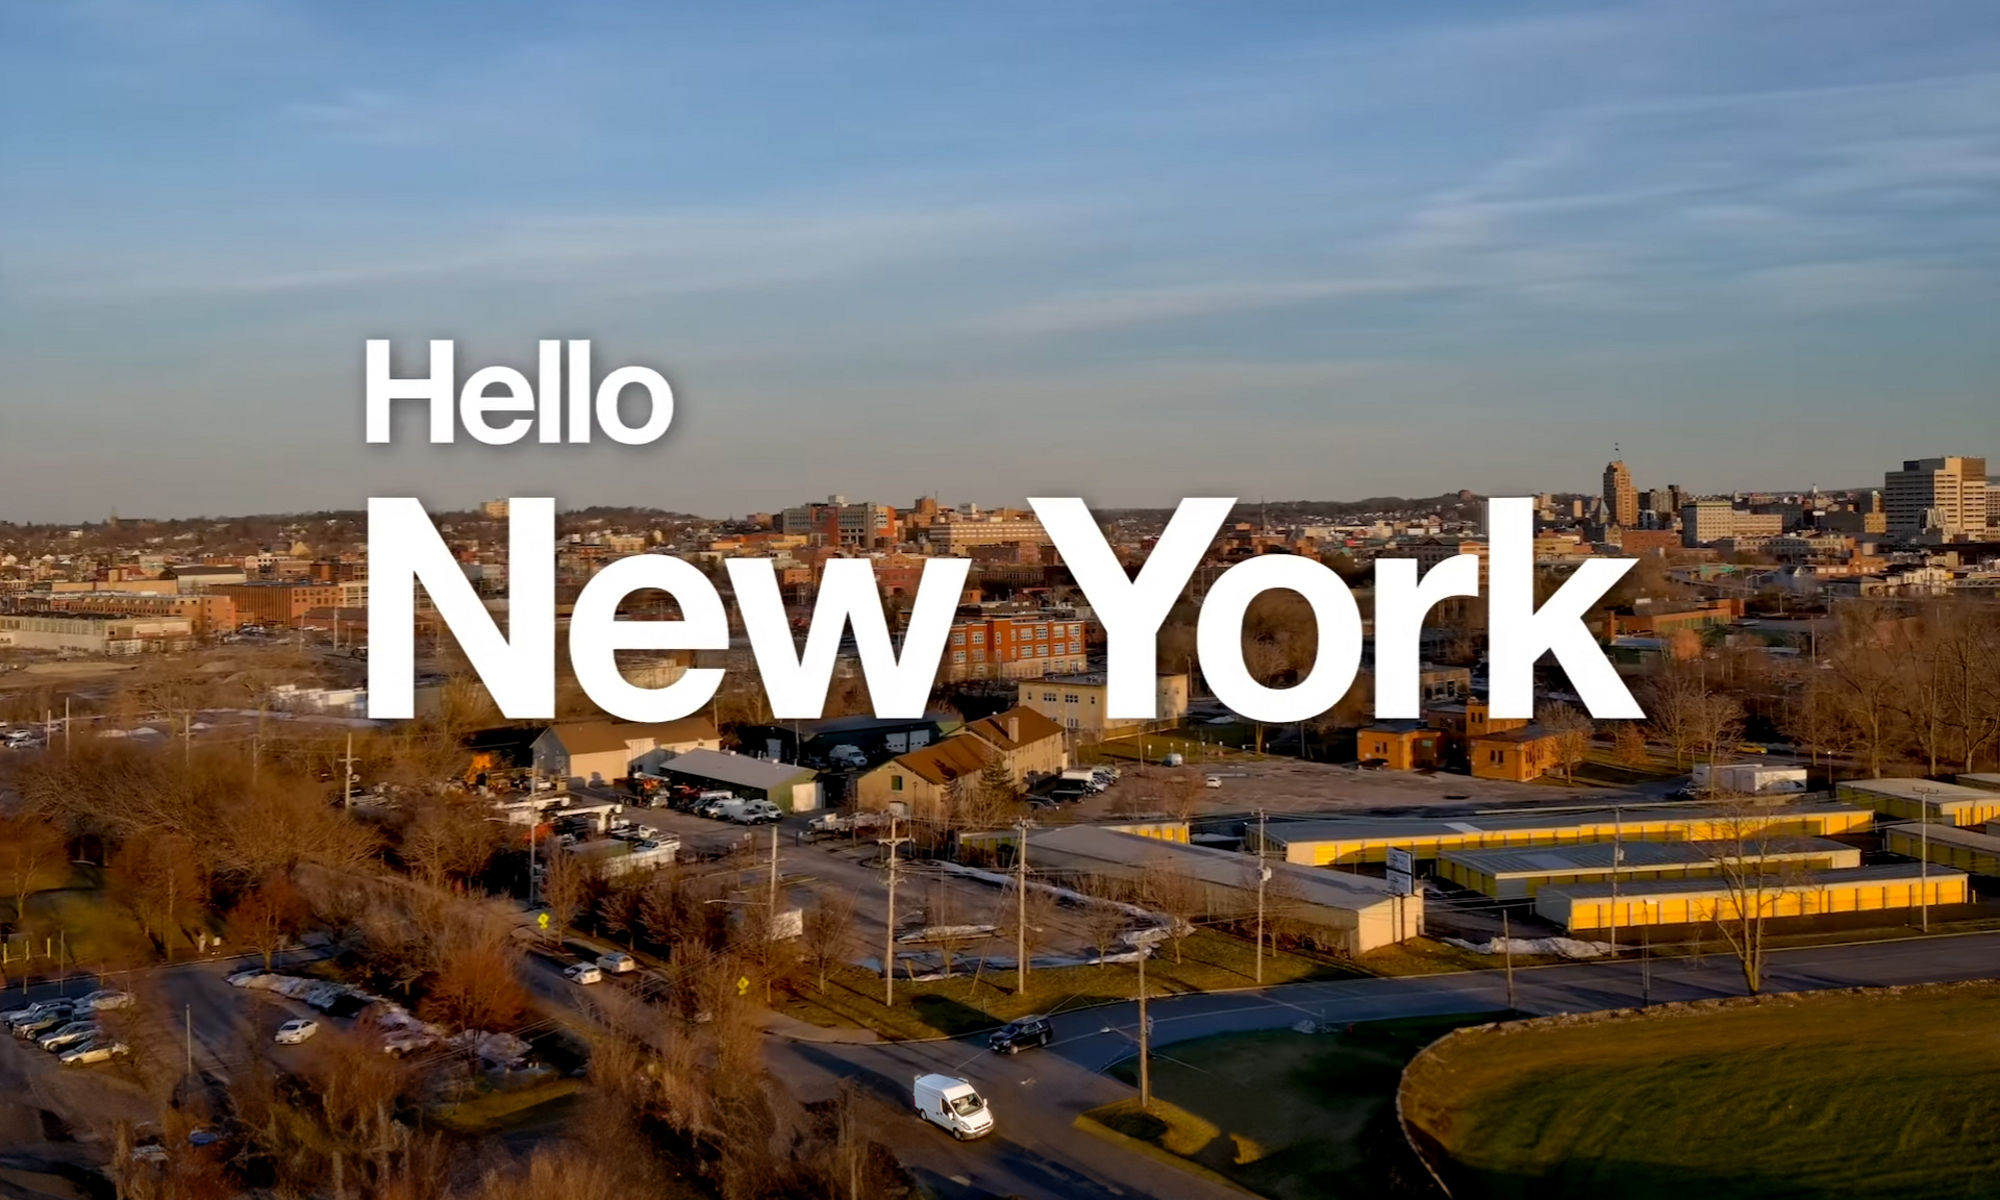 Image of the city with Hello New York written on the image